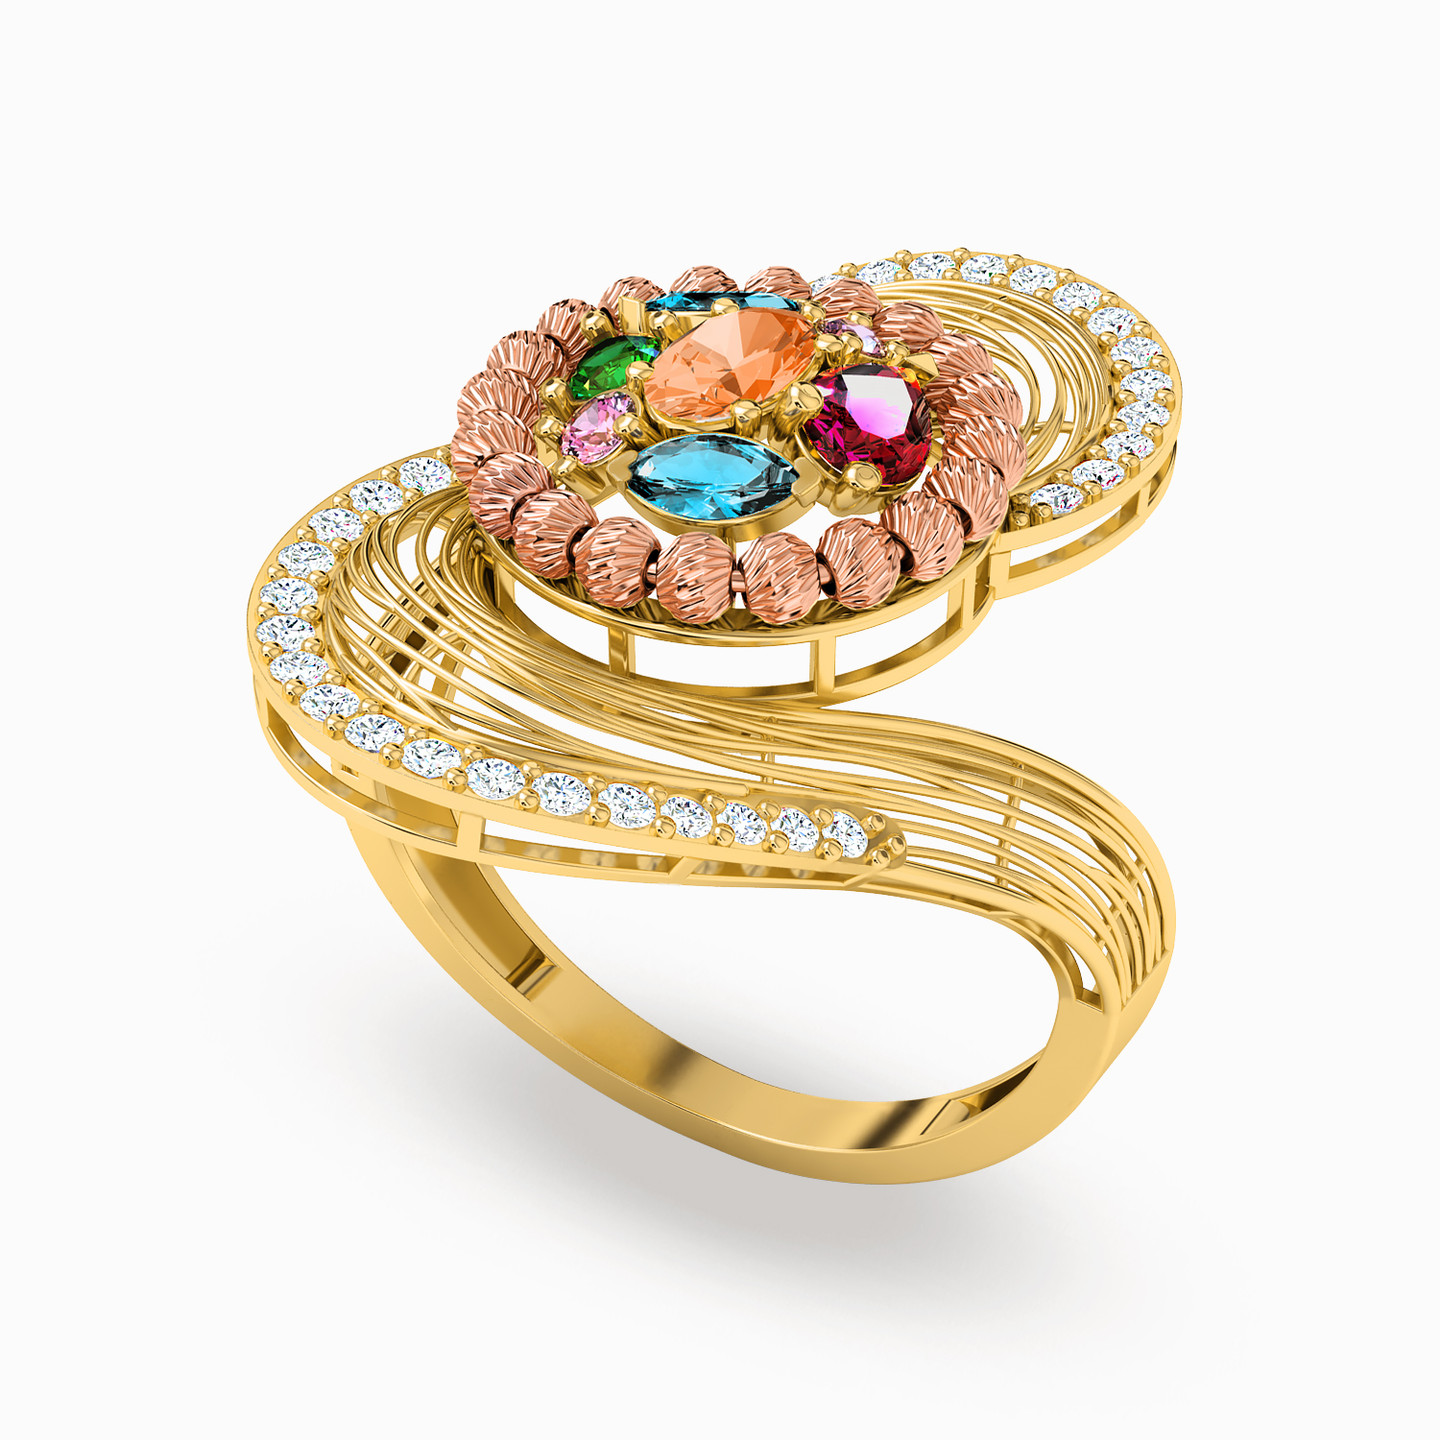 21K Gold Colored Stones Statement Ring - 2